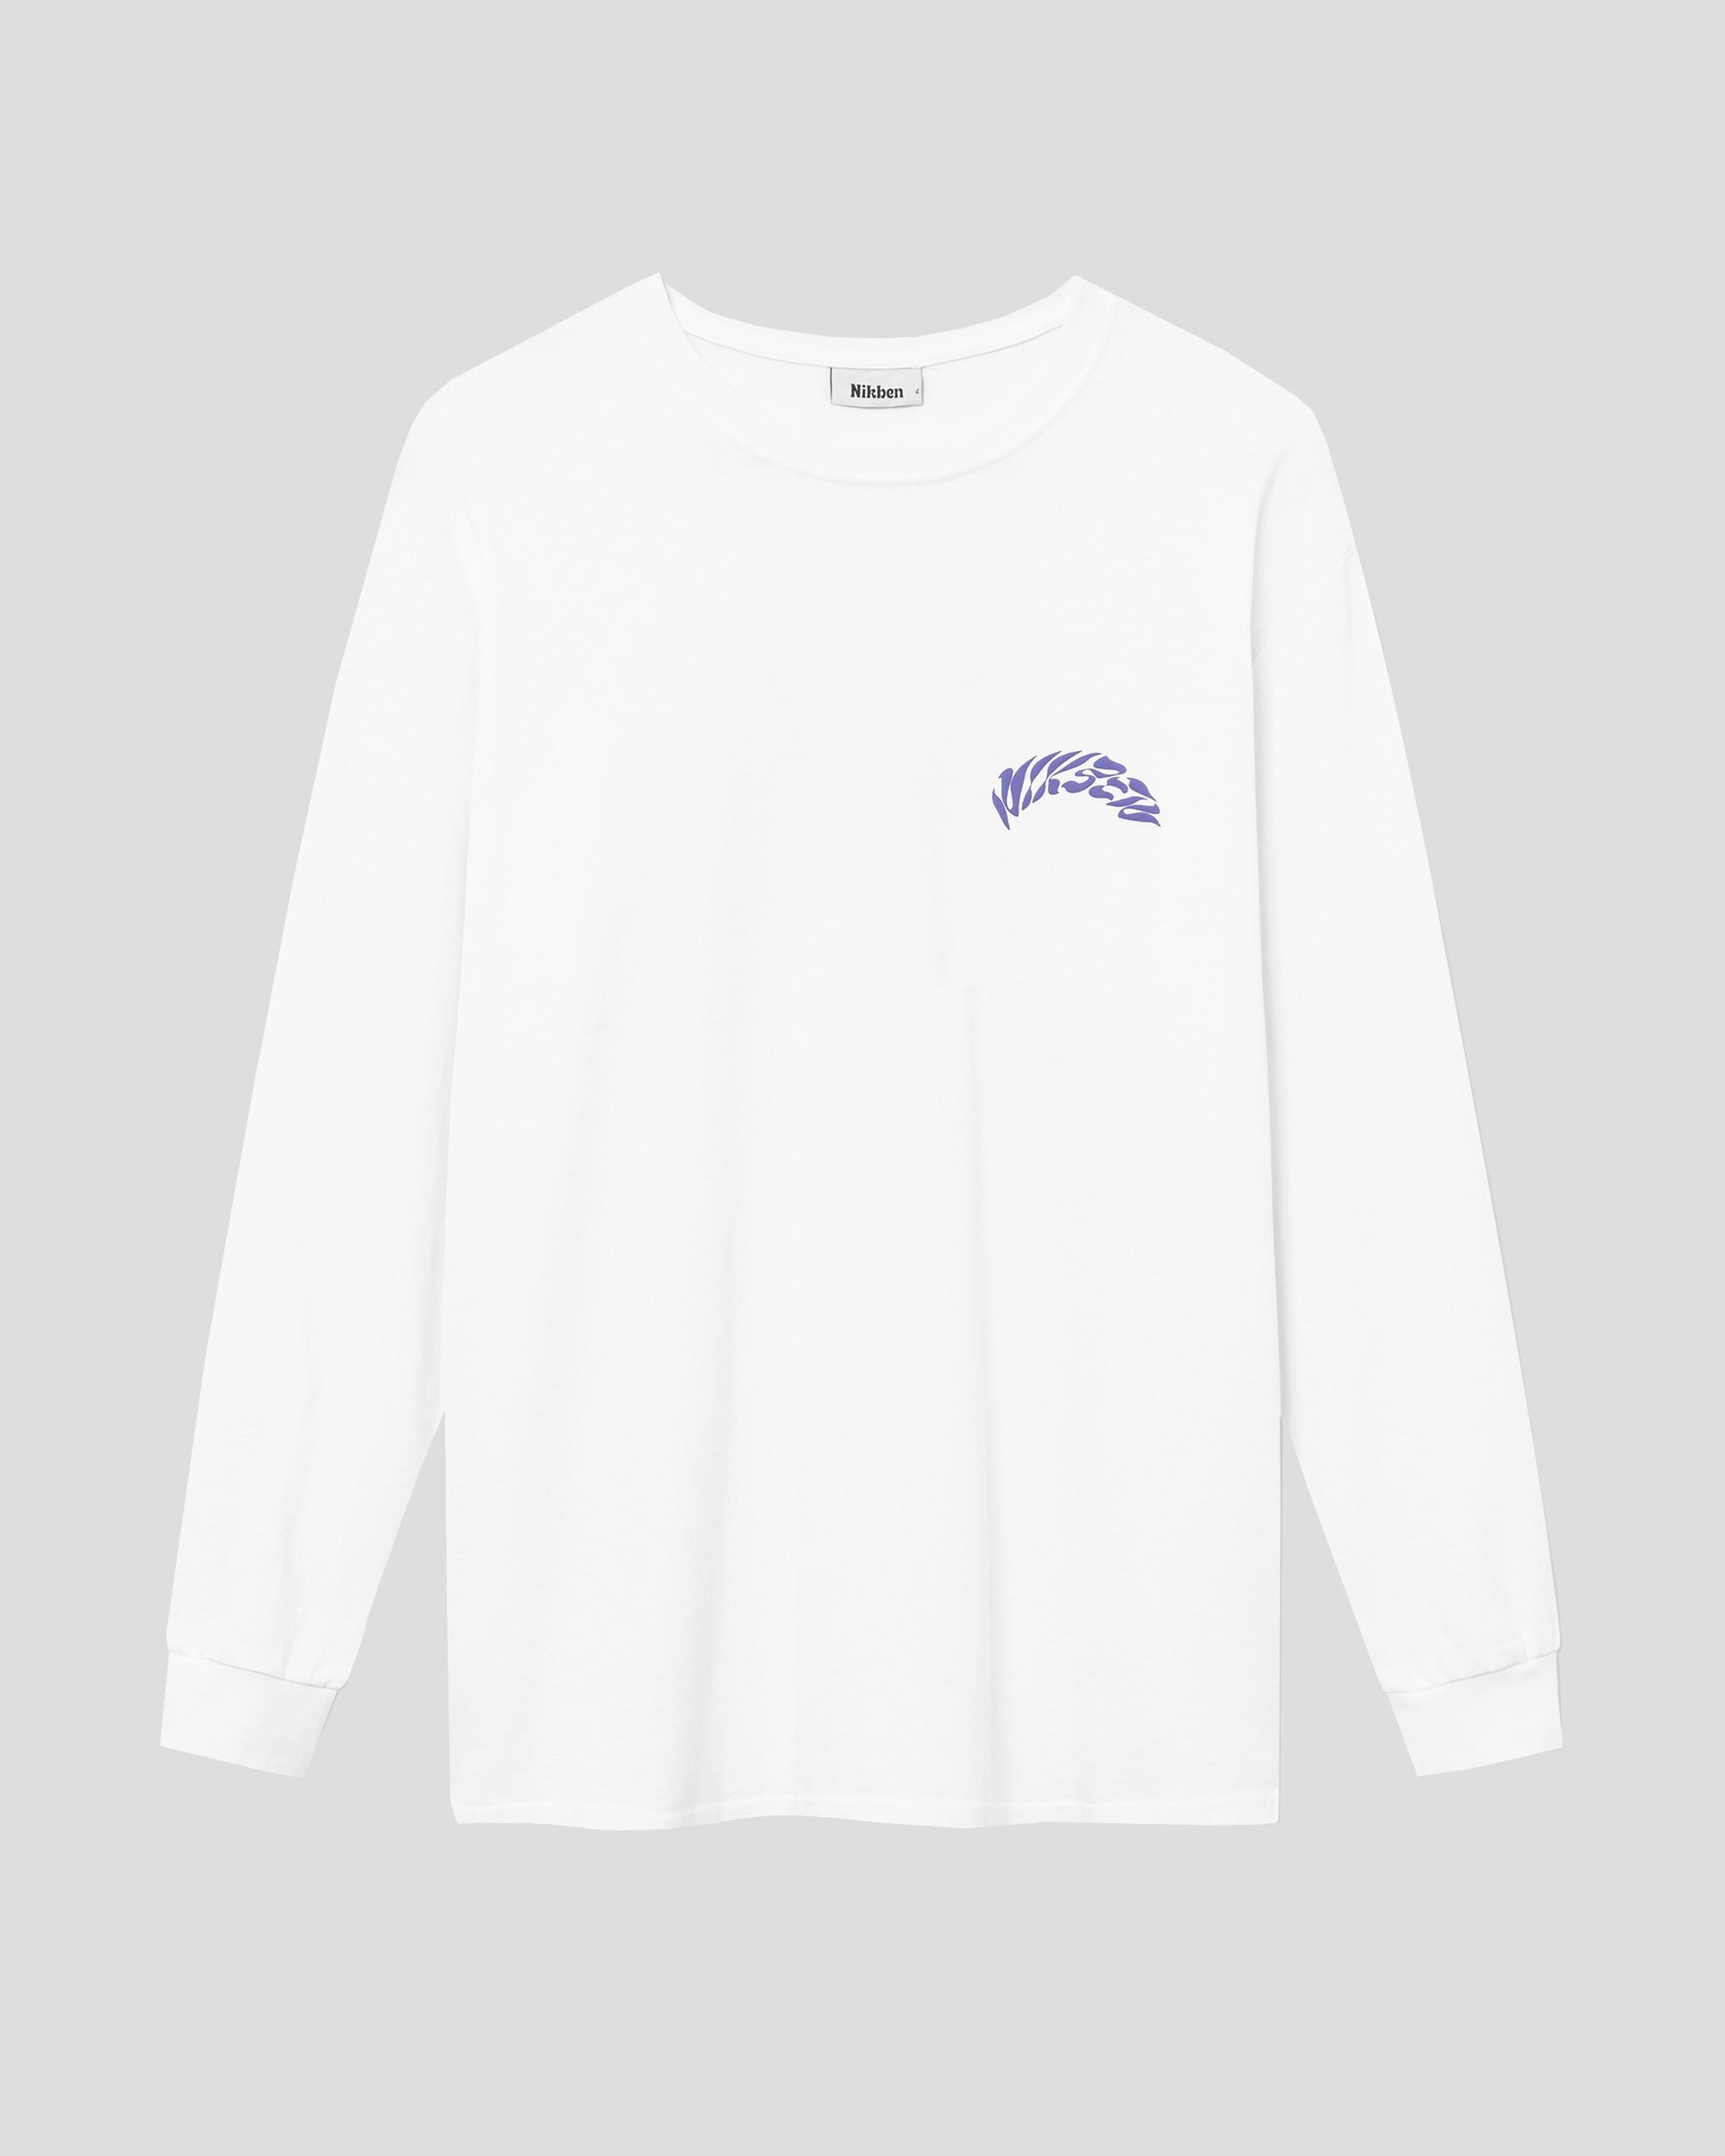 White long-sleeved t-shirt with purple 